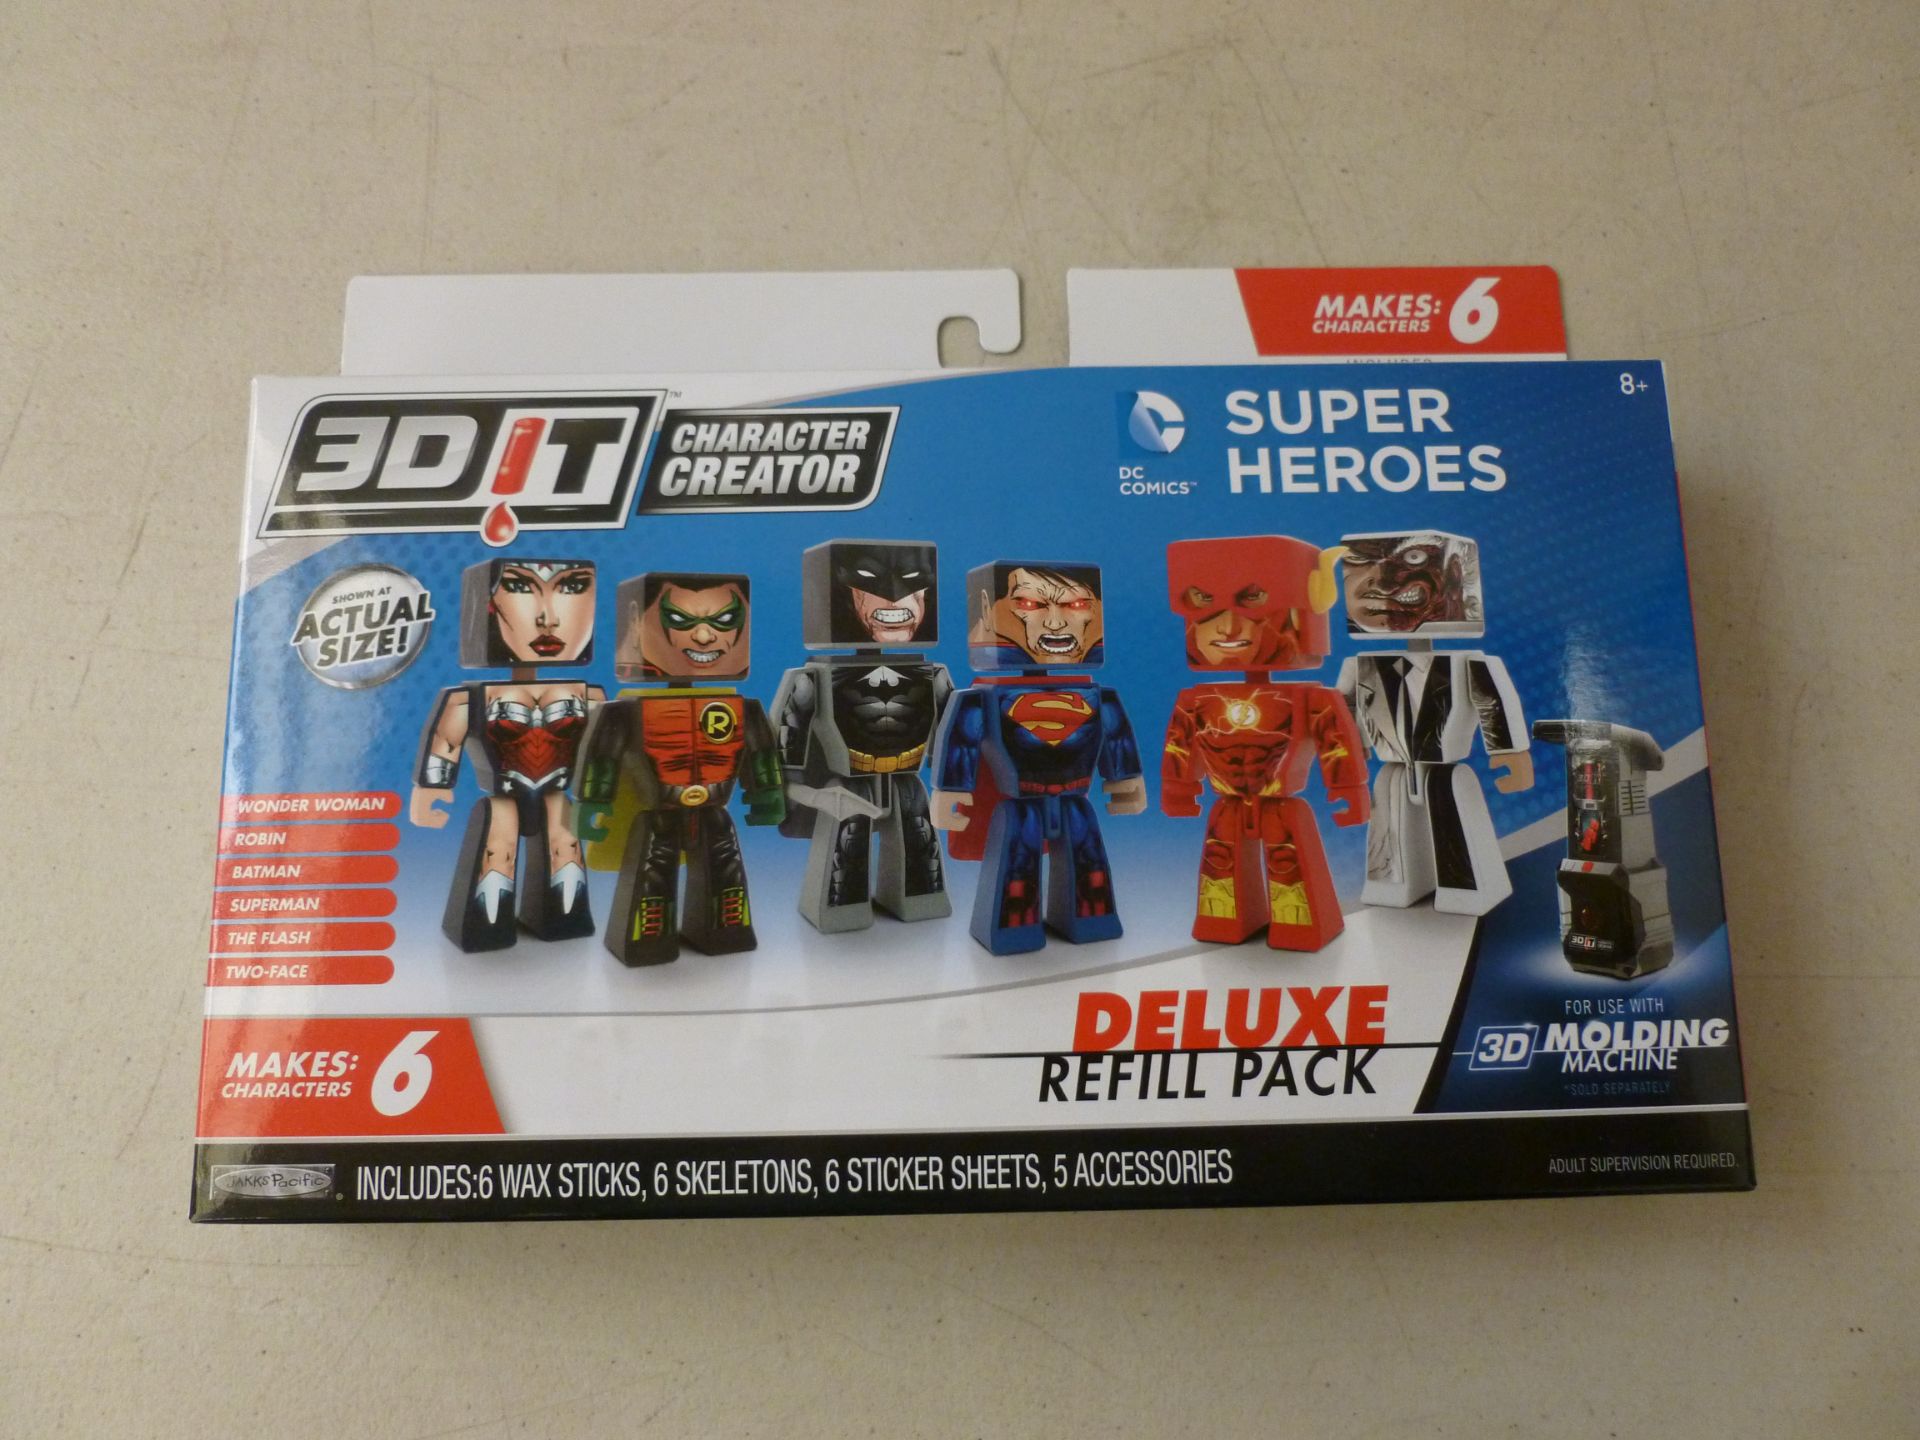 5x 3D It character creator sets, all new and boxed.